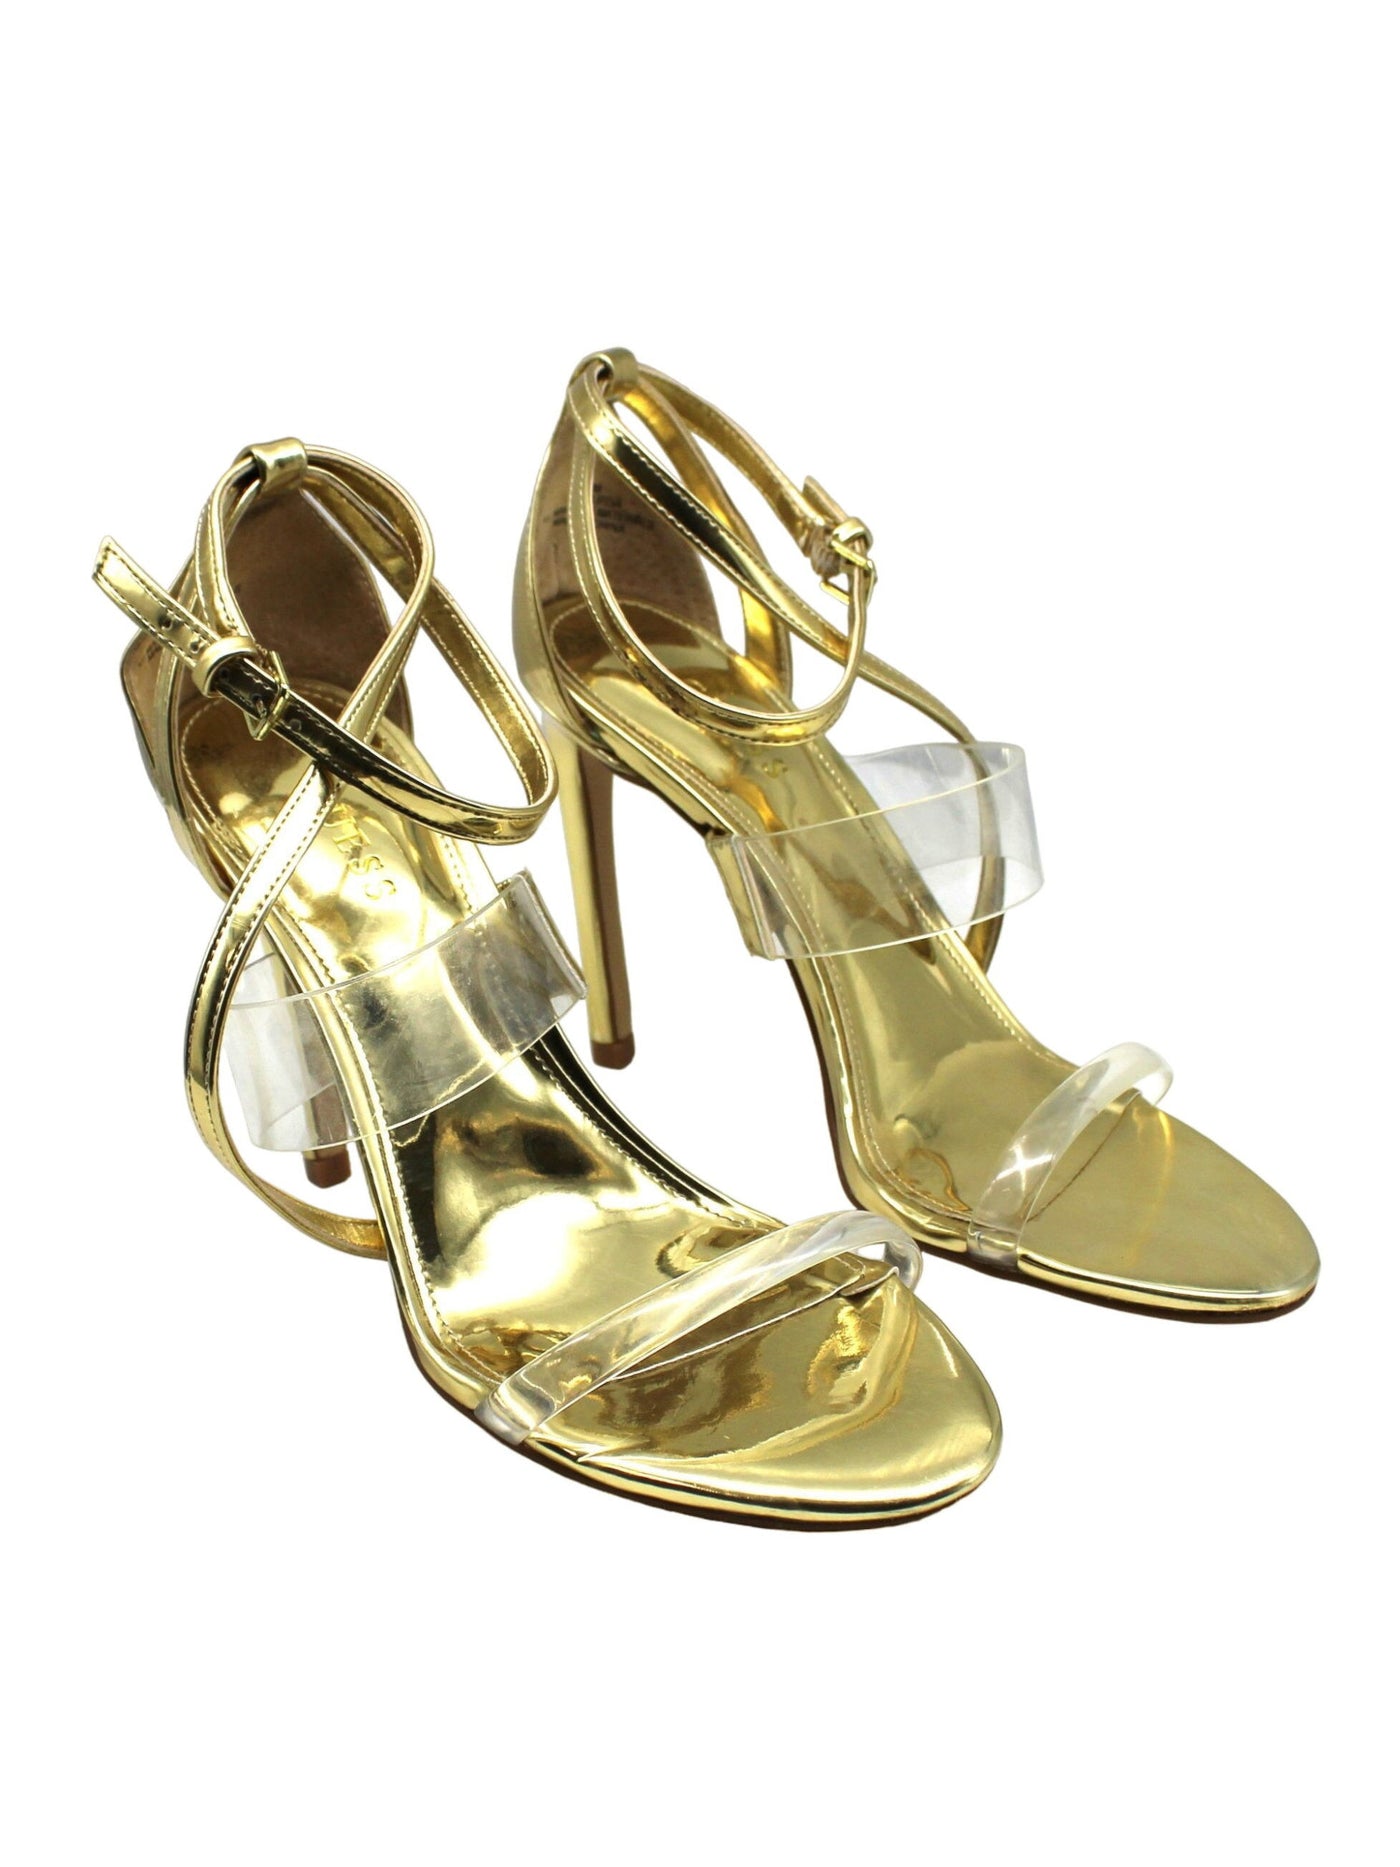 GUESS Womens Gold Transparent Metallic Goring Strappy Padded Adjustable Ankle Strap Felecia Almond Toe Stiletto Buckle Heeled Sandal 6 M